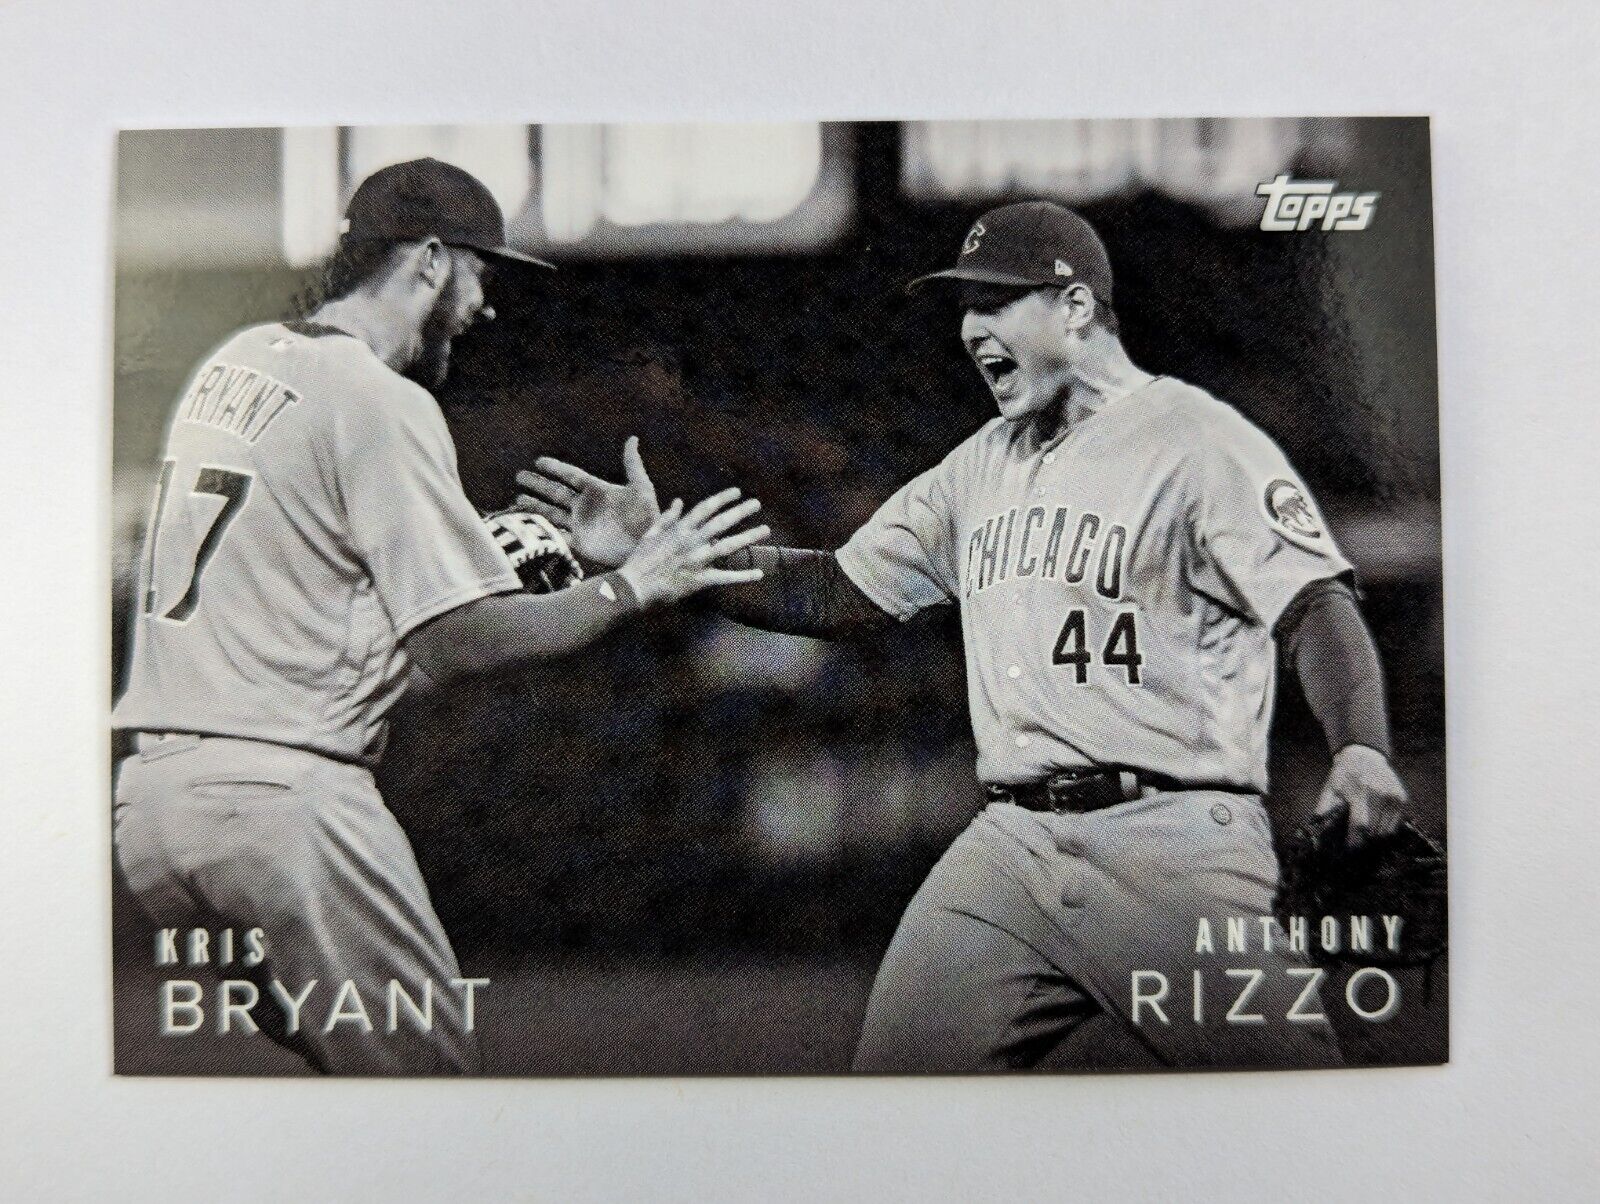 2018 Topps On Demand Black & White Candid Moments Kris Bryant Anthony Rizzo /167